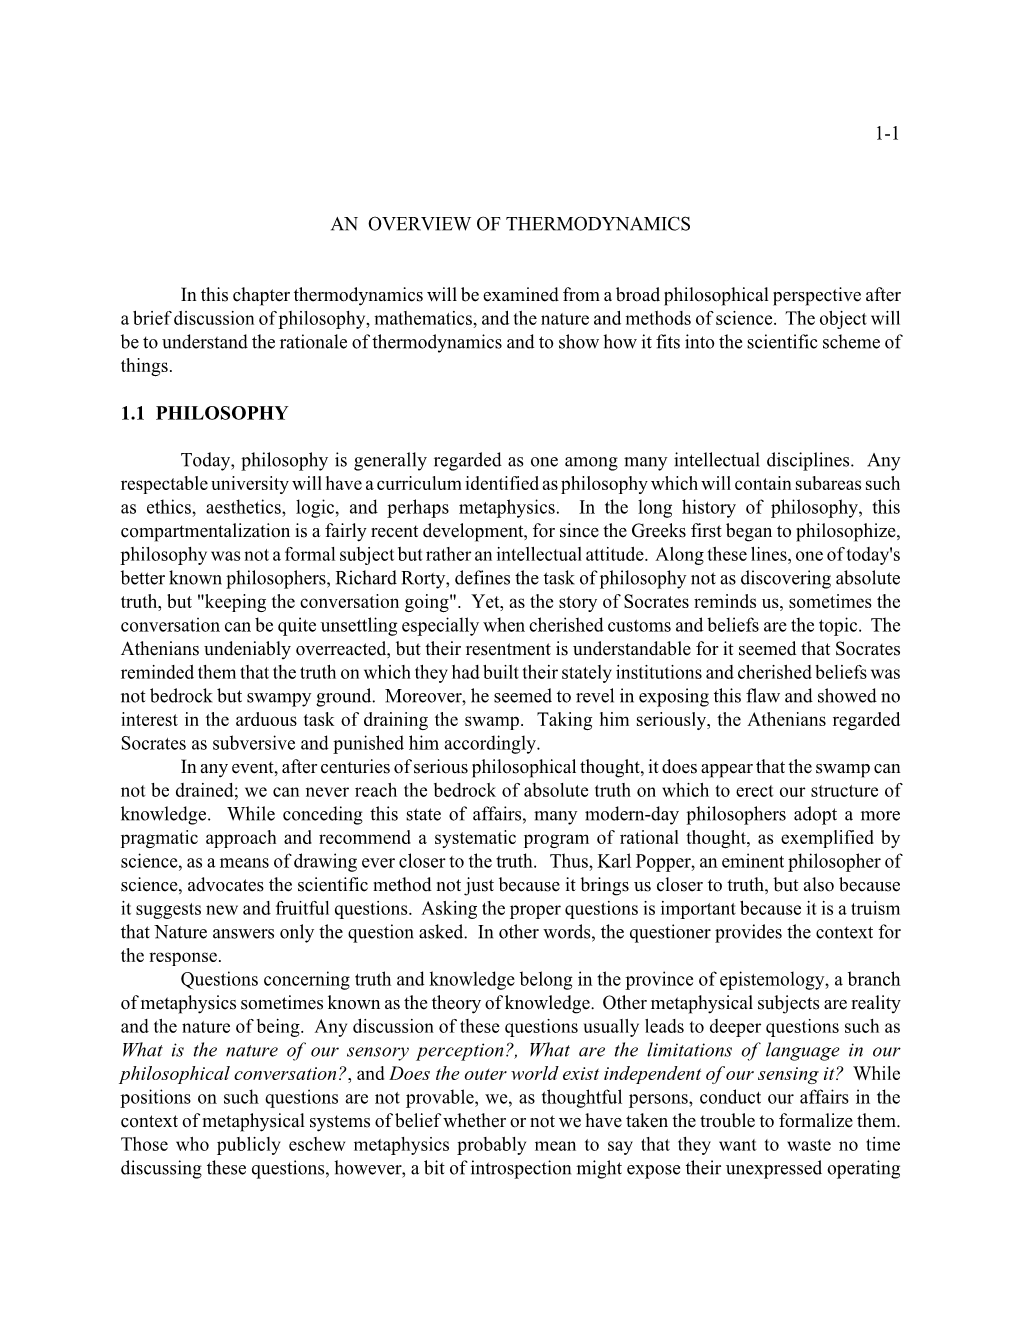 An Overview of Thermodynamics (Pdf)